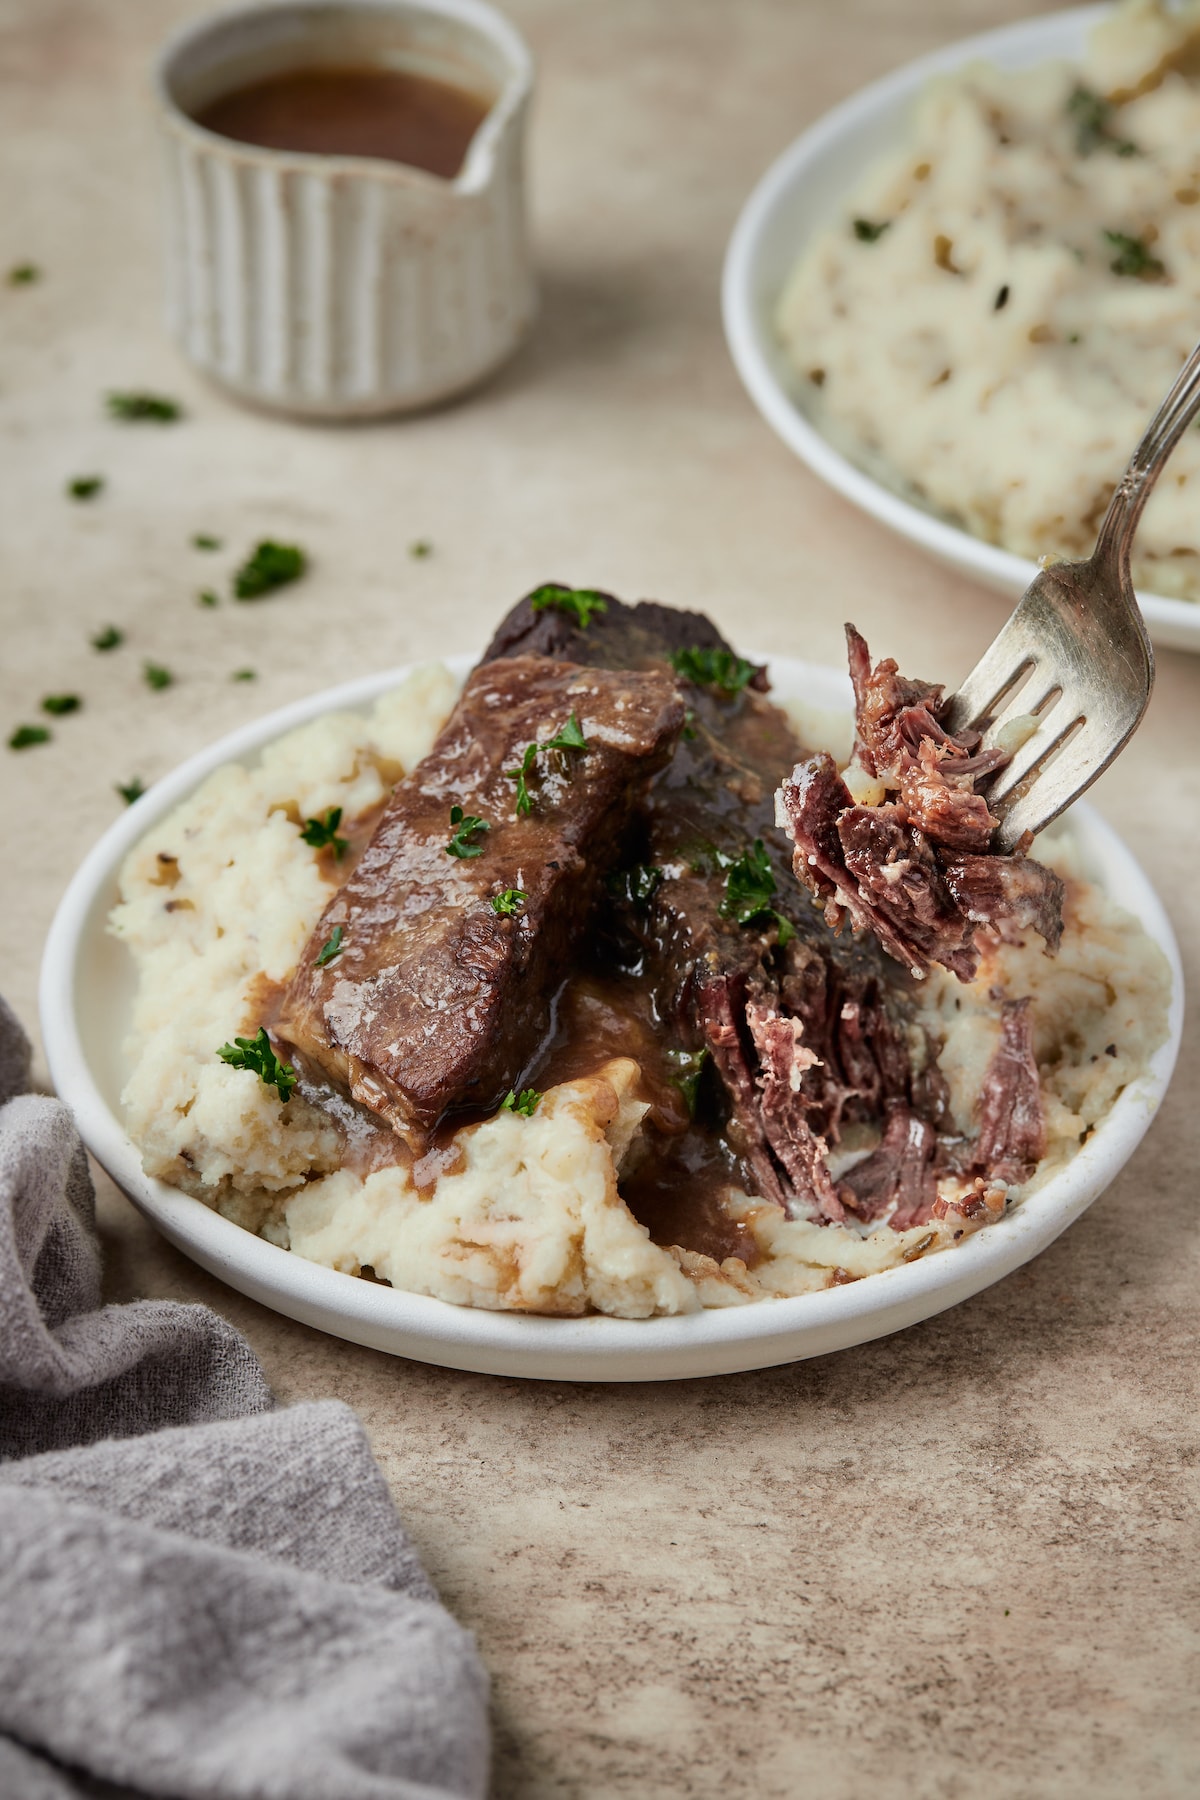 A fork picking up an Instant Pot short rib served in a bowl over mashed potatoes.